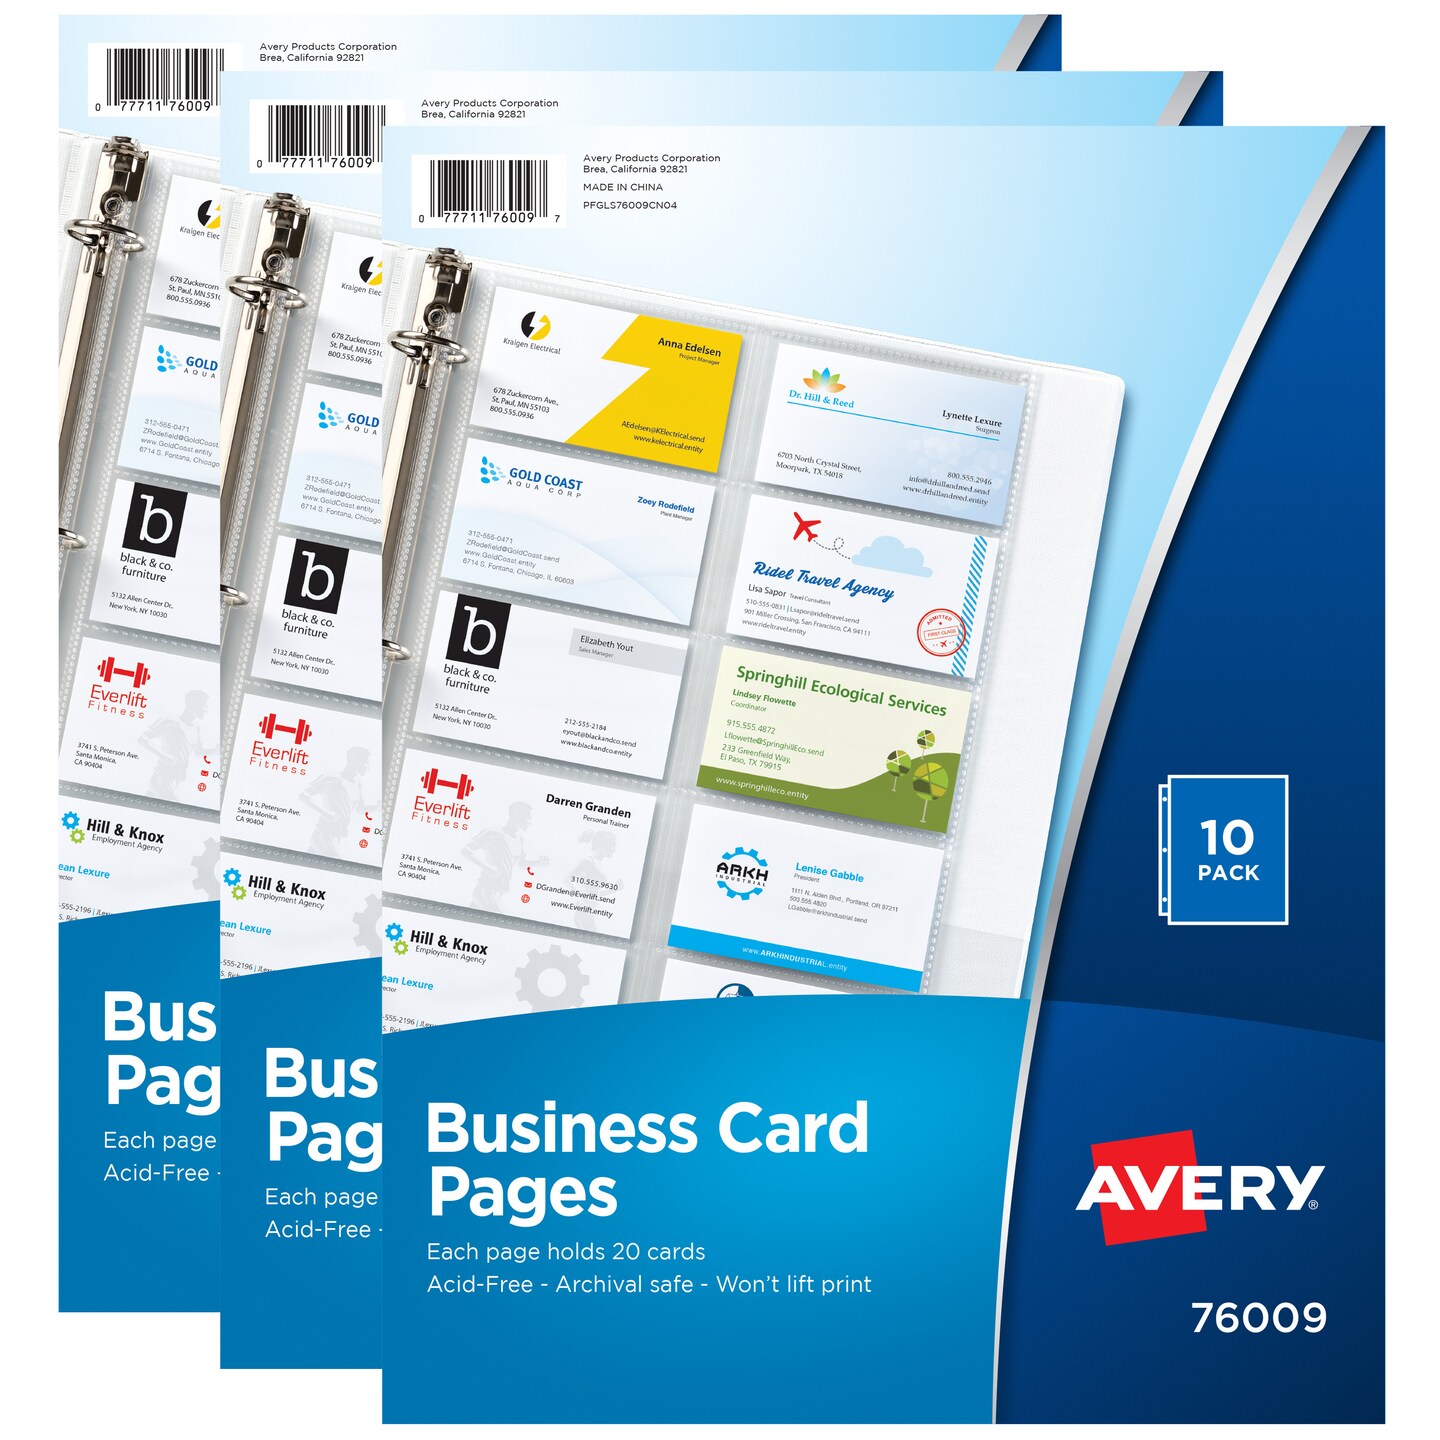 Avery Clear Business Card Organizer Pages for 3 Ring Binders, 10 Per Pack, 3-Pack, Holds 600 Cards Total (78723)